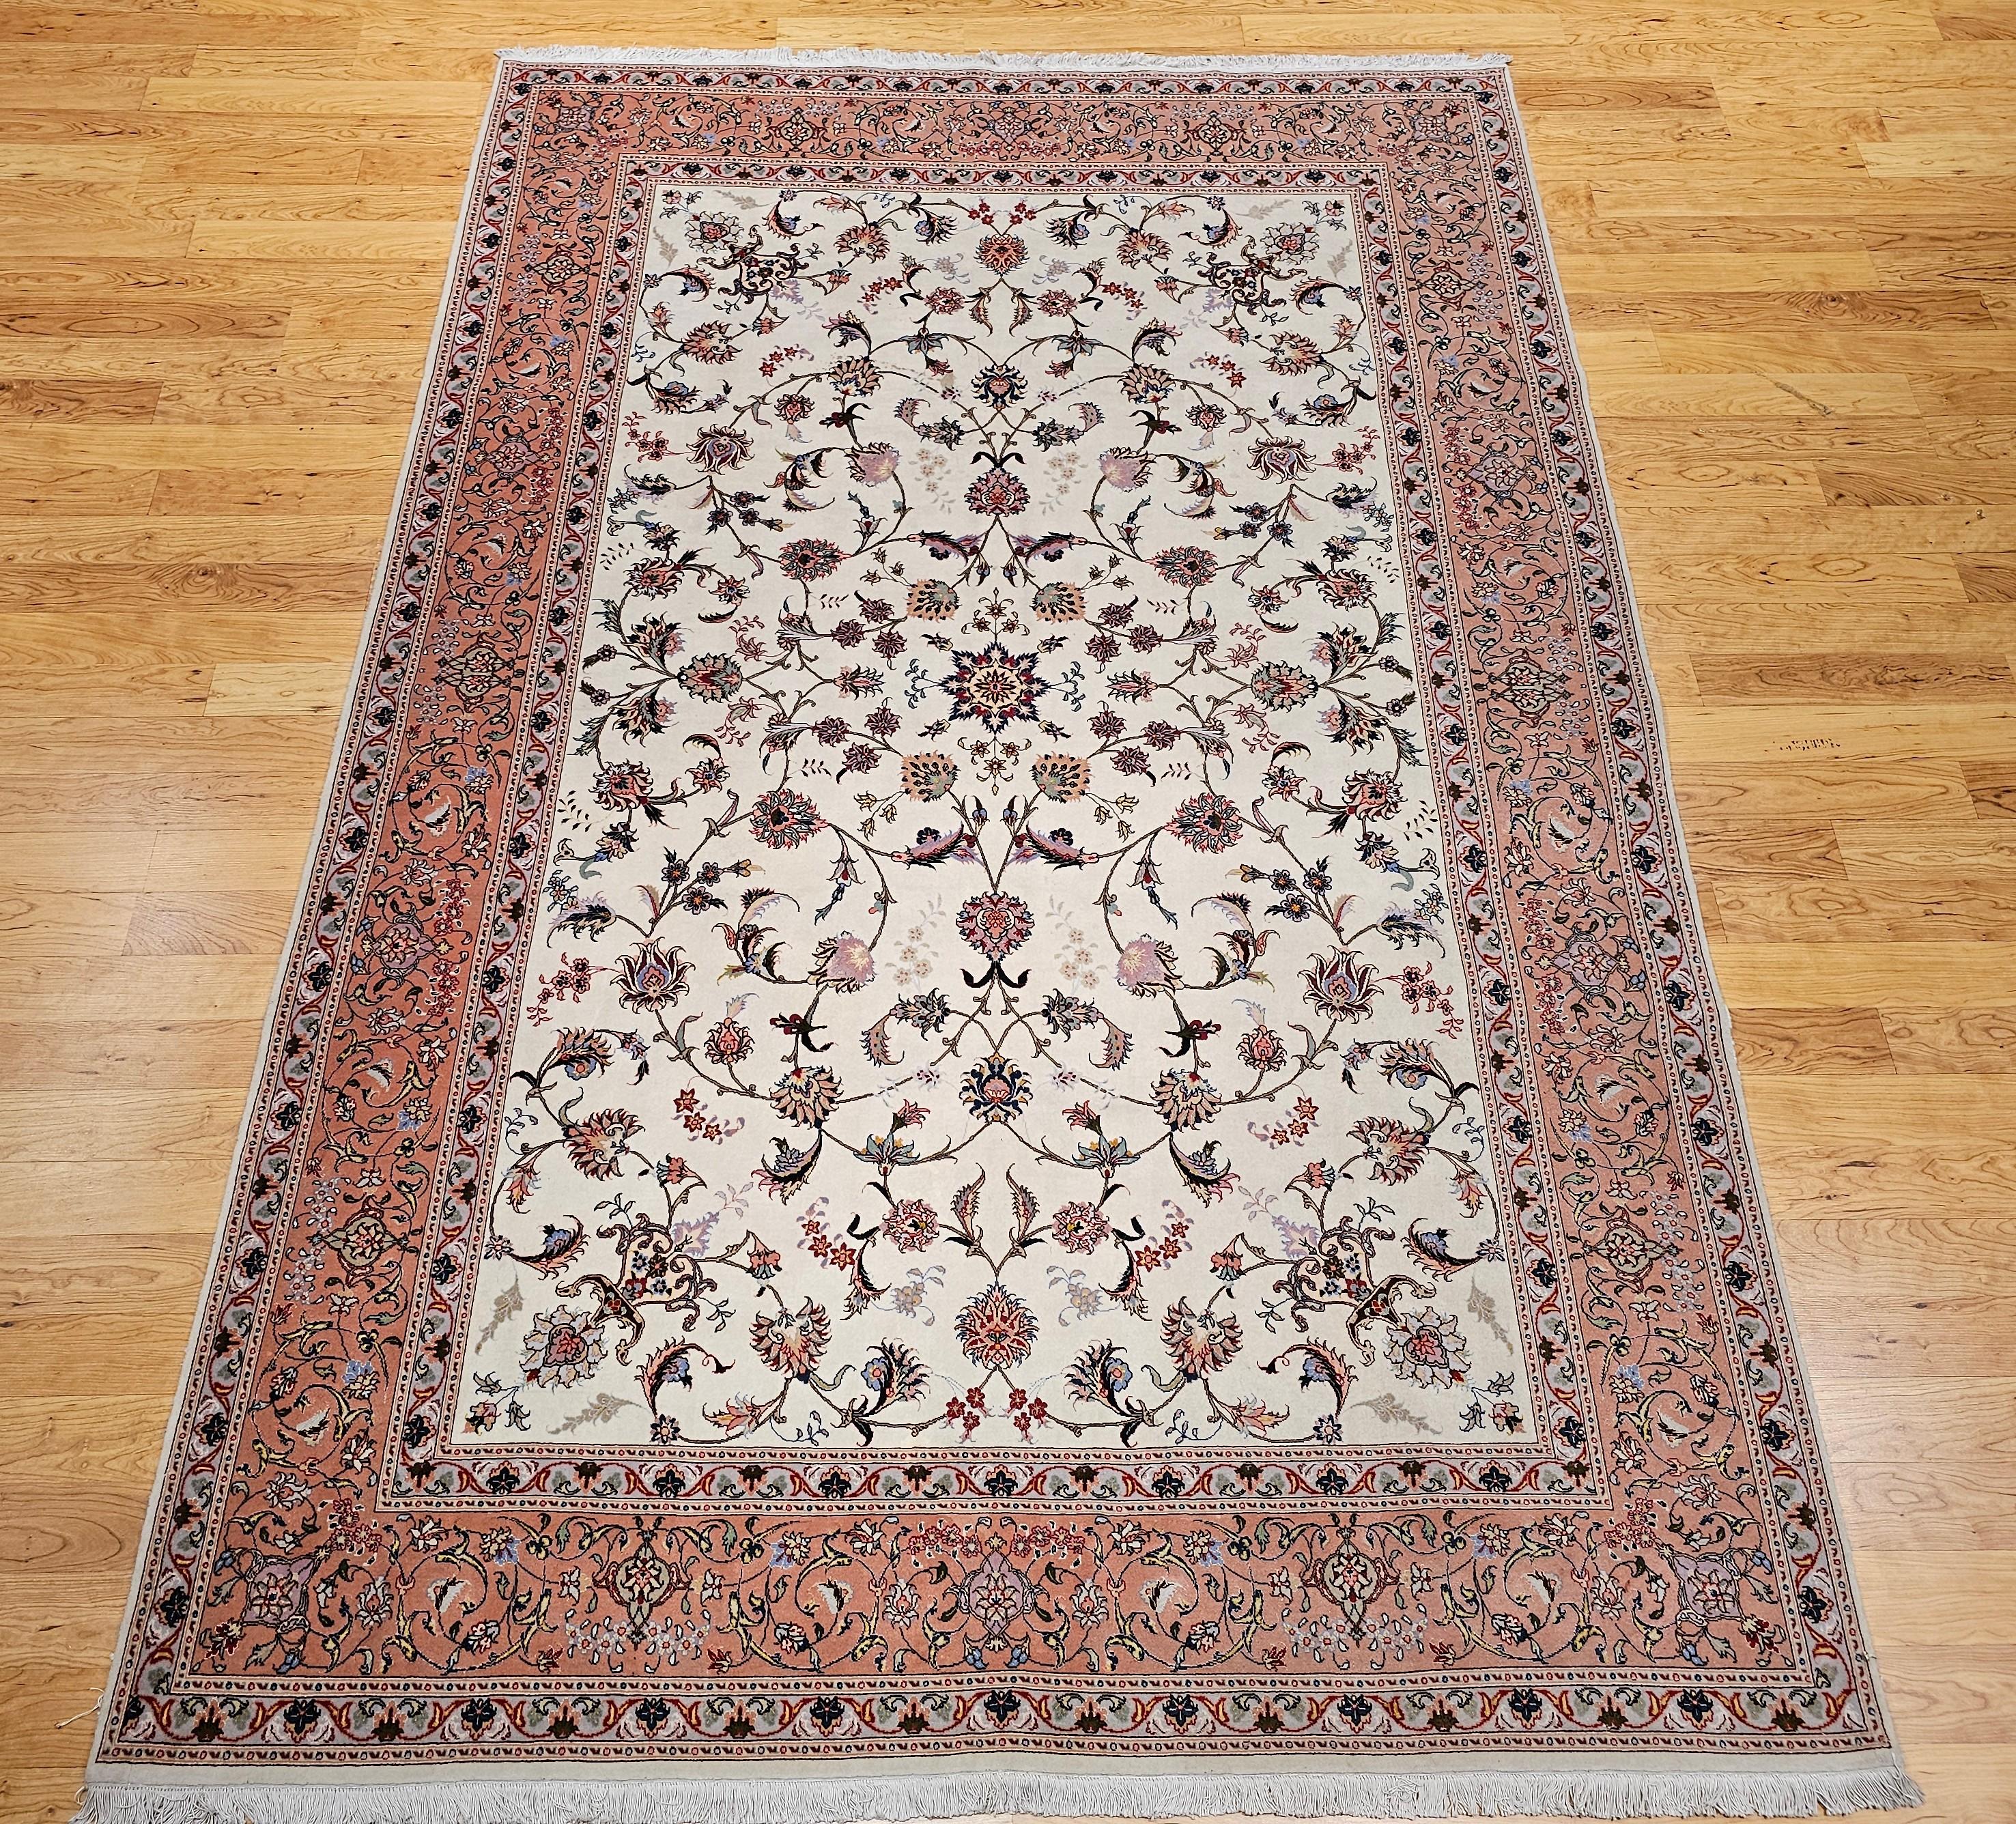 Wonderfully graceful and understatedly beautiful fine weave Persian Tabriz room size rug in an allover floral pattern with an ivory color background and a pale pink border.  It is artistically woven with a wool pile on a cotton foundation with silk